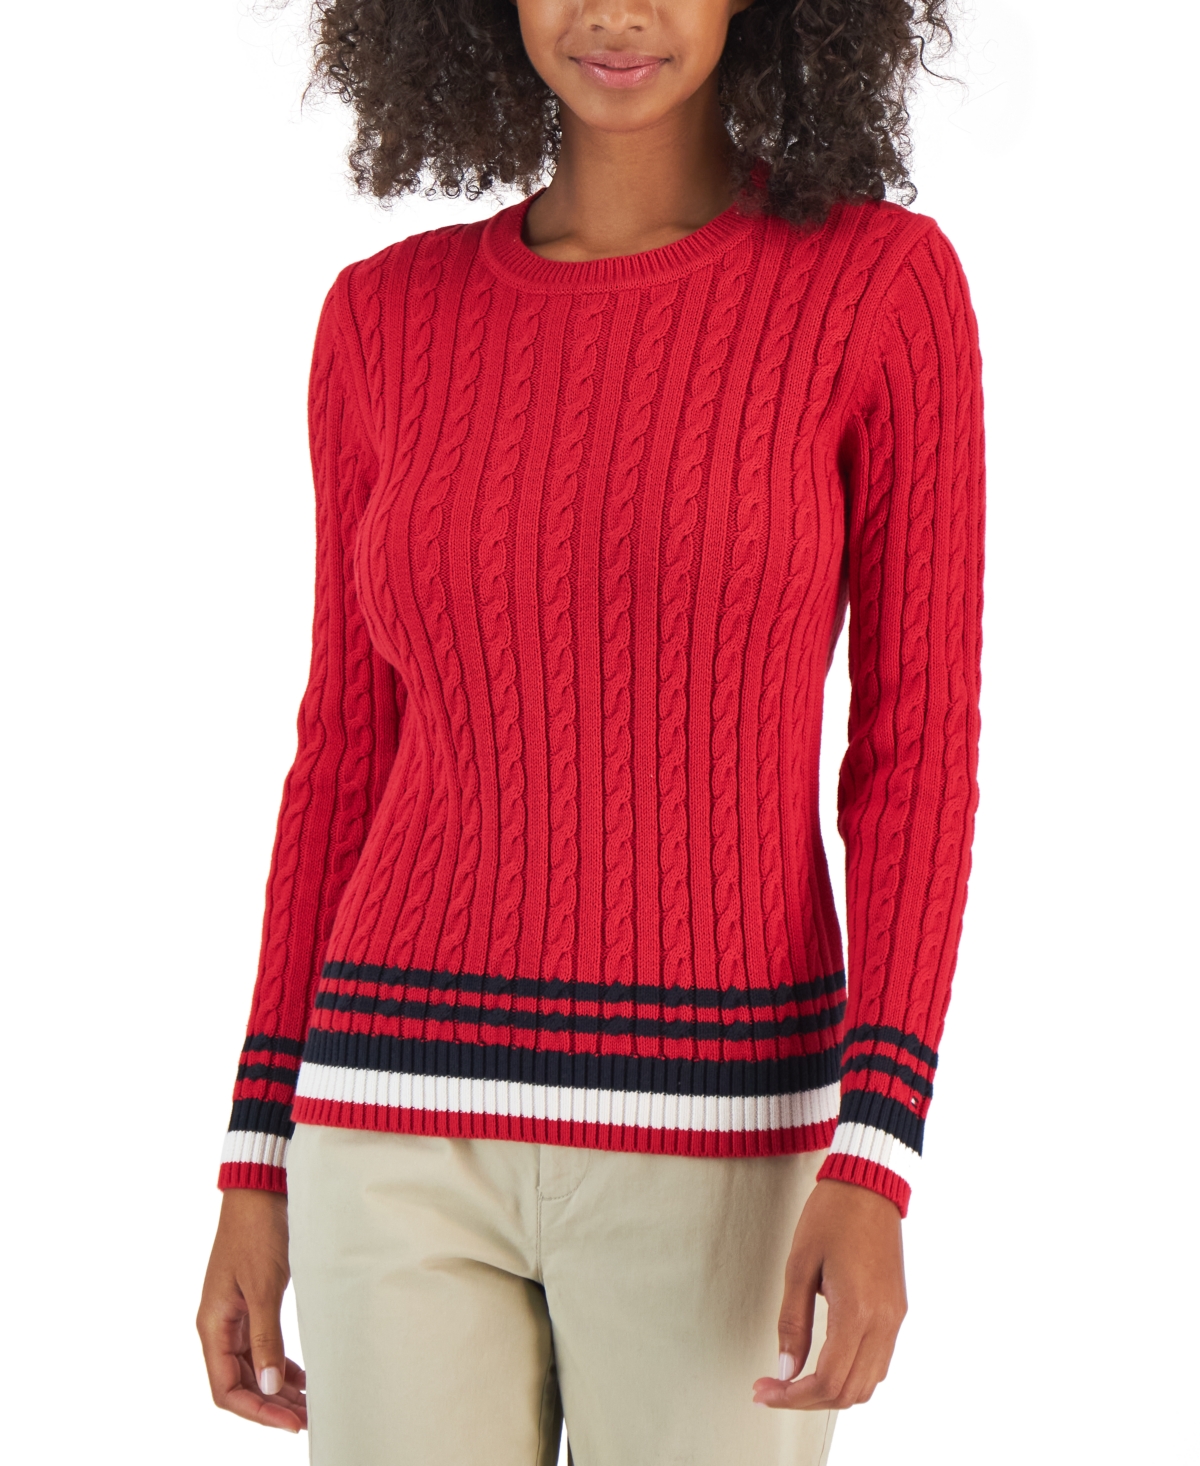 Tommy Hilfiger Women's Cotton Cable-Knit Tipped Sleeve Sweater